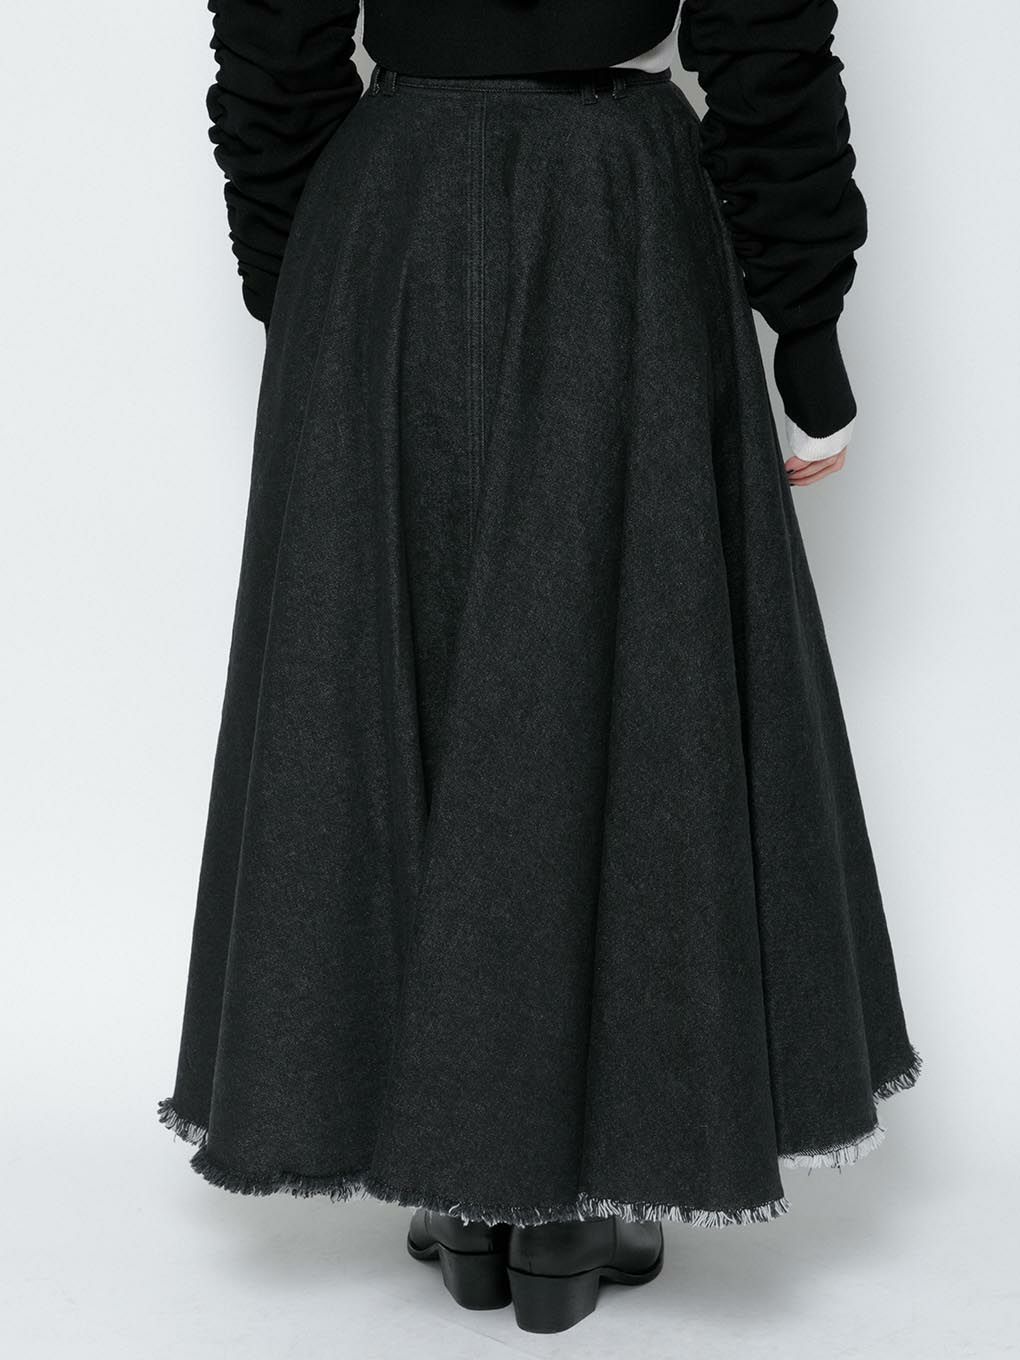 melt the lady medieval flare skirt   メルトスカート